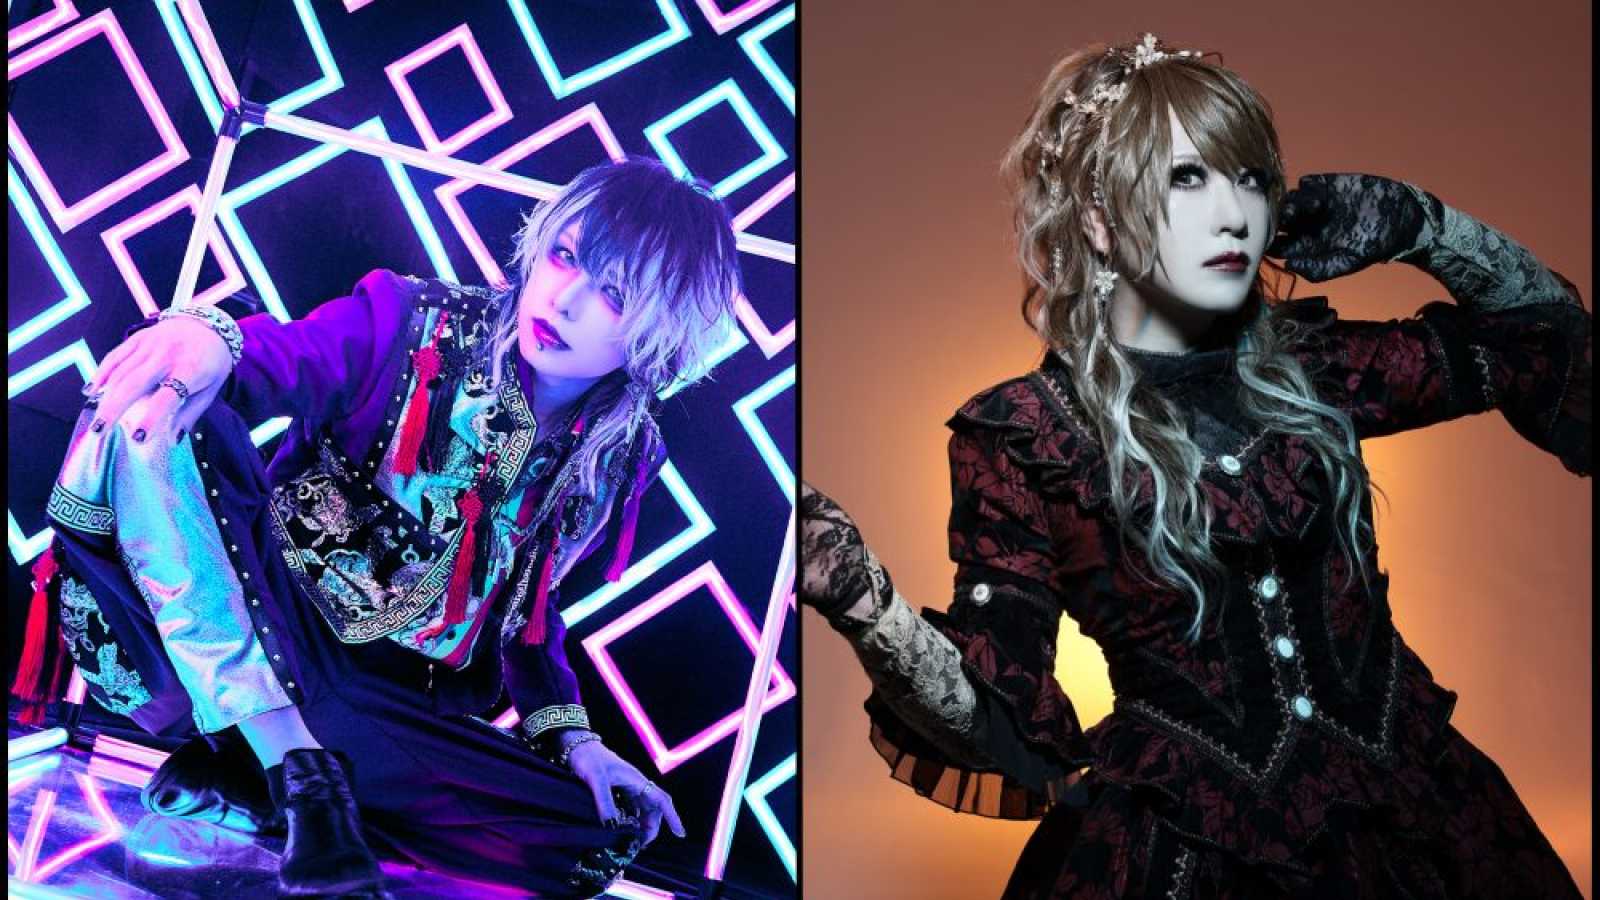 D=OUT's Kouki and HIZAKI to Perform in the US © Kouki (D=OUT) x HIZAKI. All rights reserved.